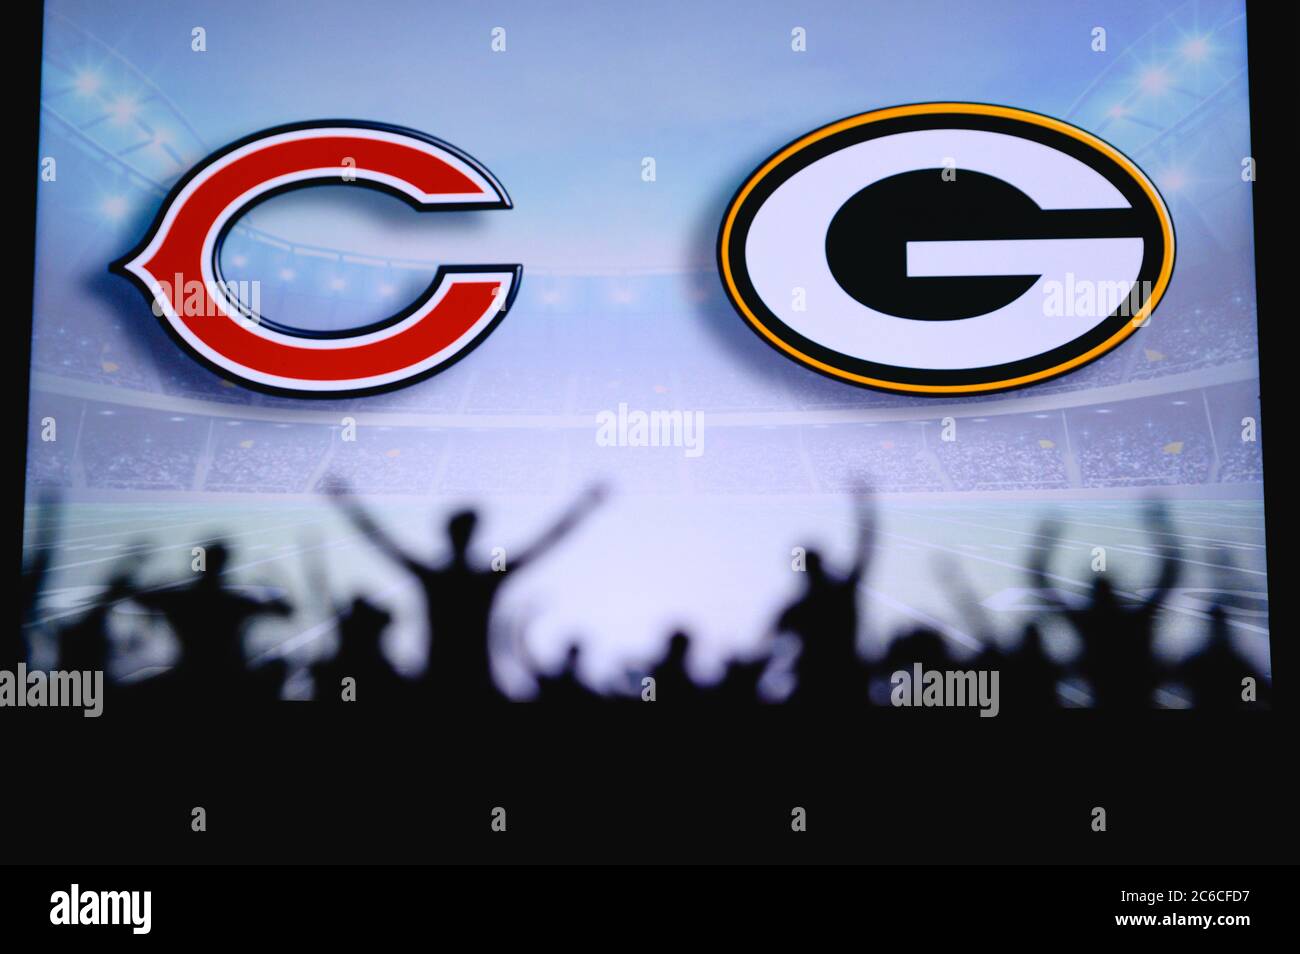 Chicago Bears vs. Green Bay Packers. Fans support on NFL Game. Silhouette of supporters, big screen with two rivals in background. Stock Photo